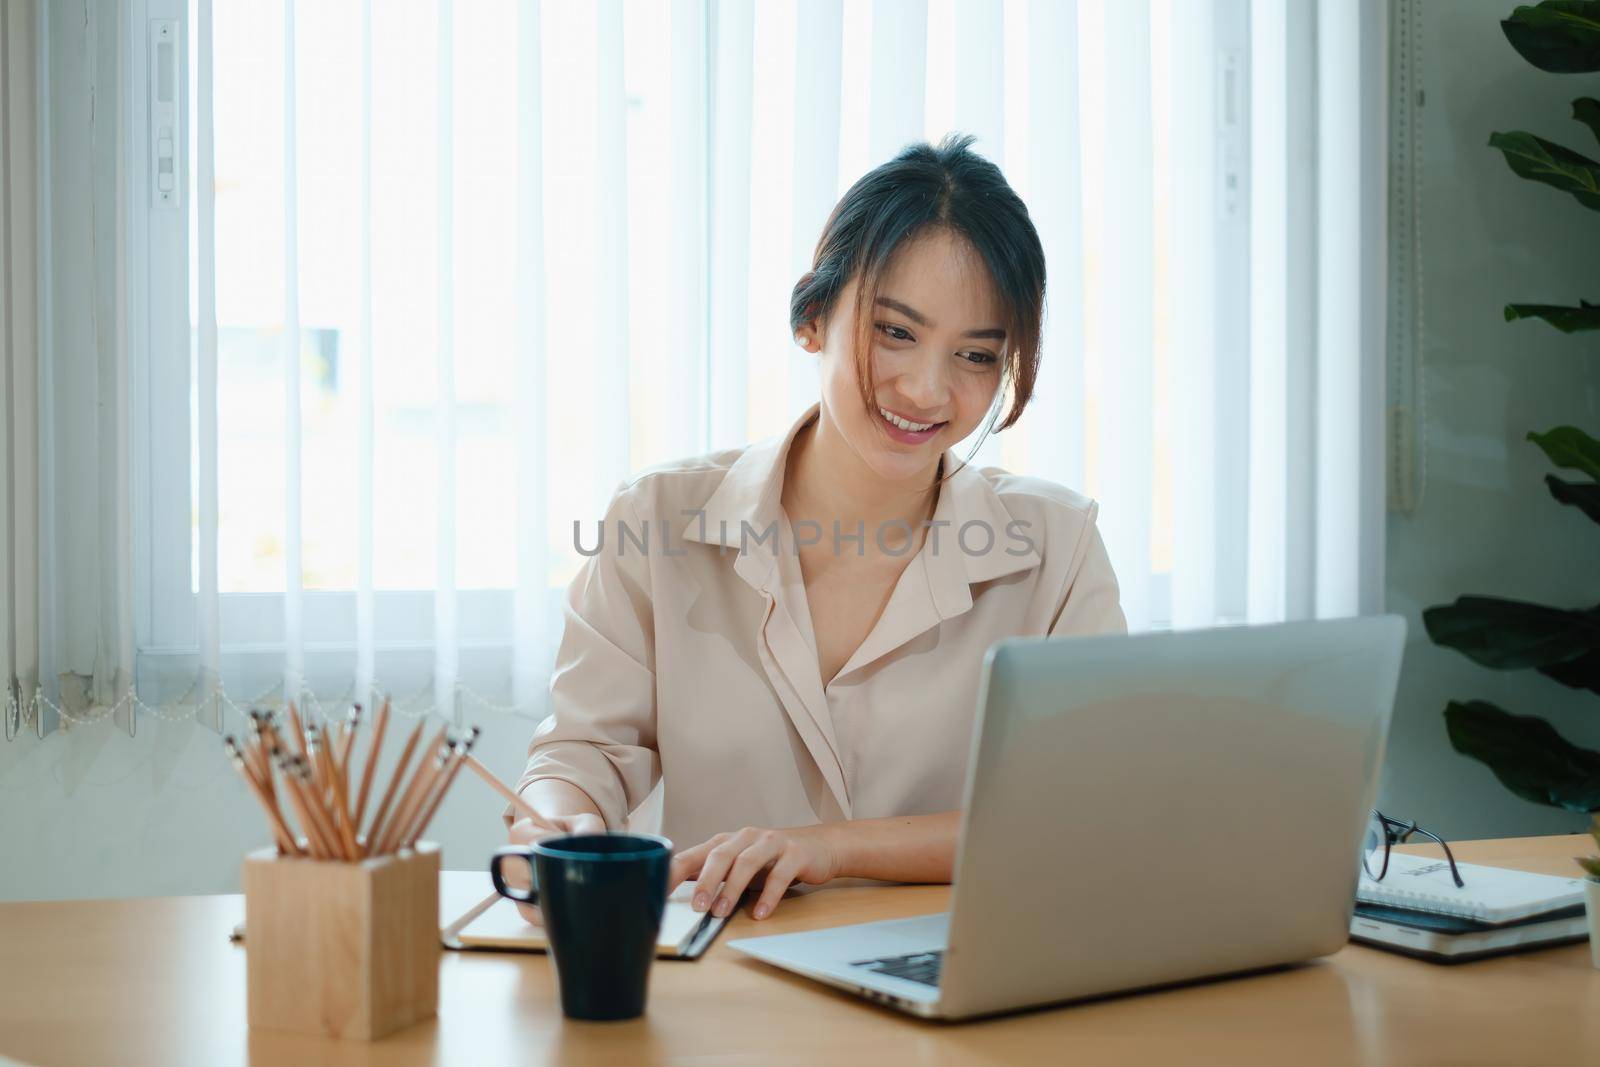 A joyful woman concentrates on a webinar on her laptop computer